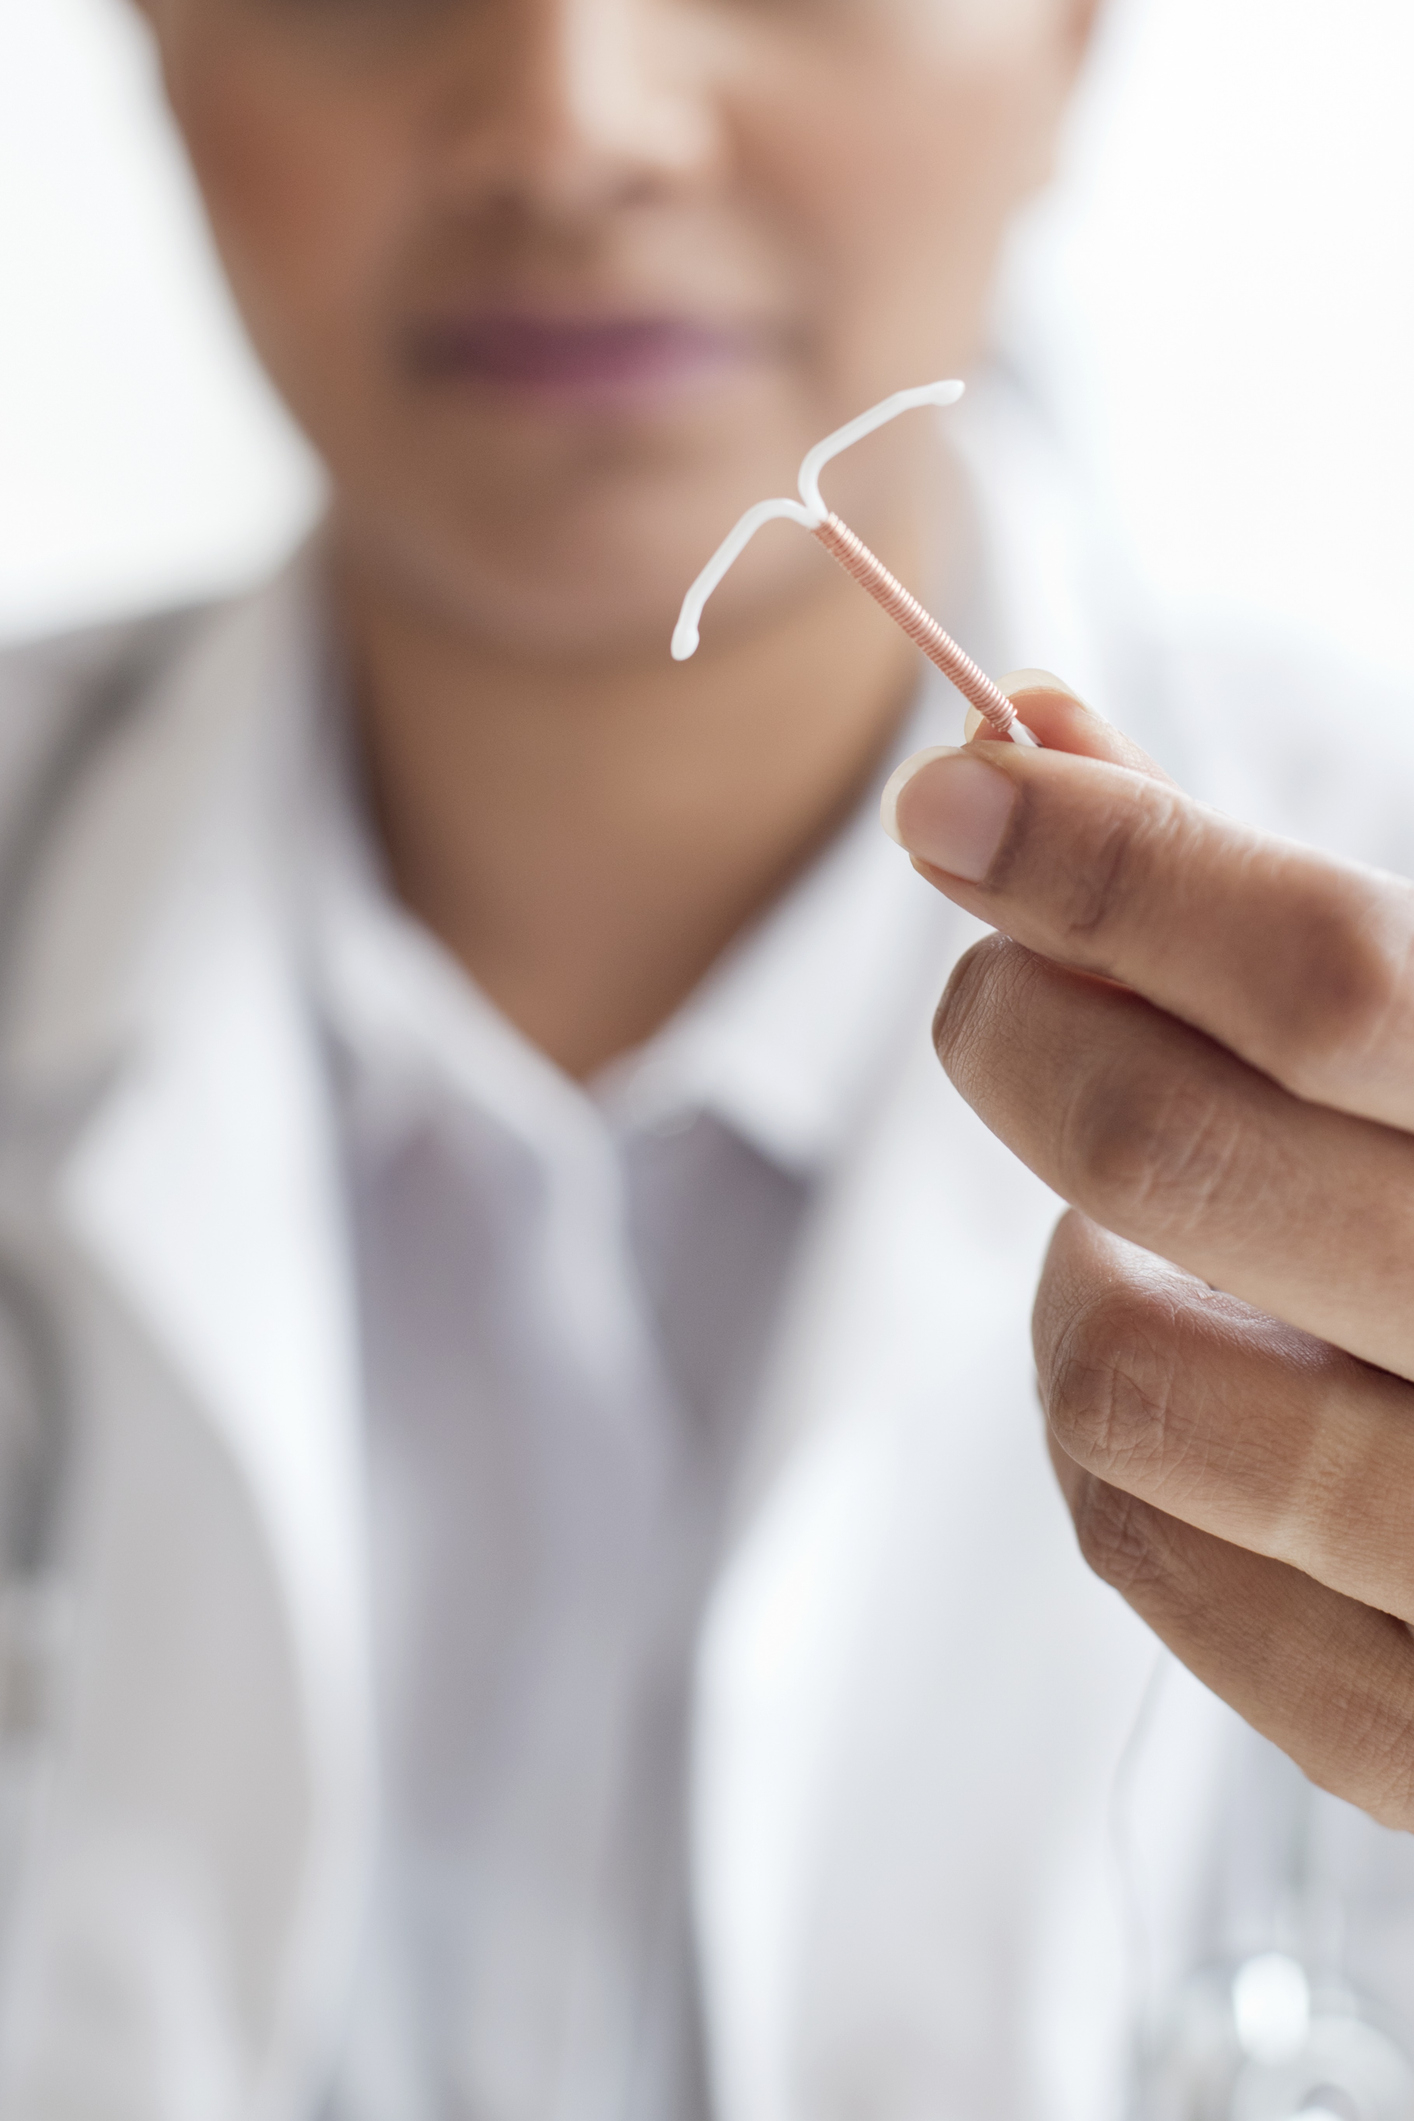 Healthcare professional holding an IUD contraceptive device